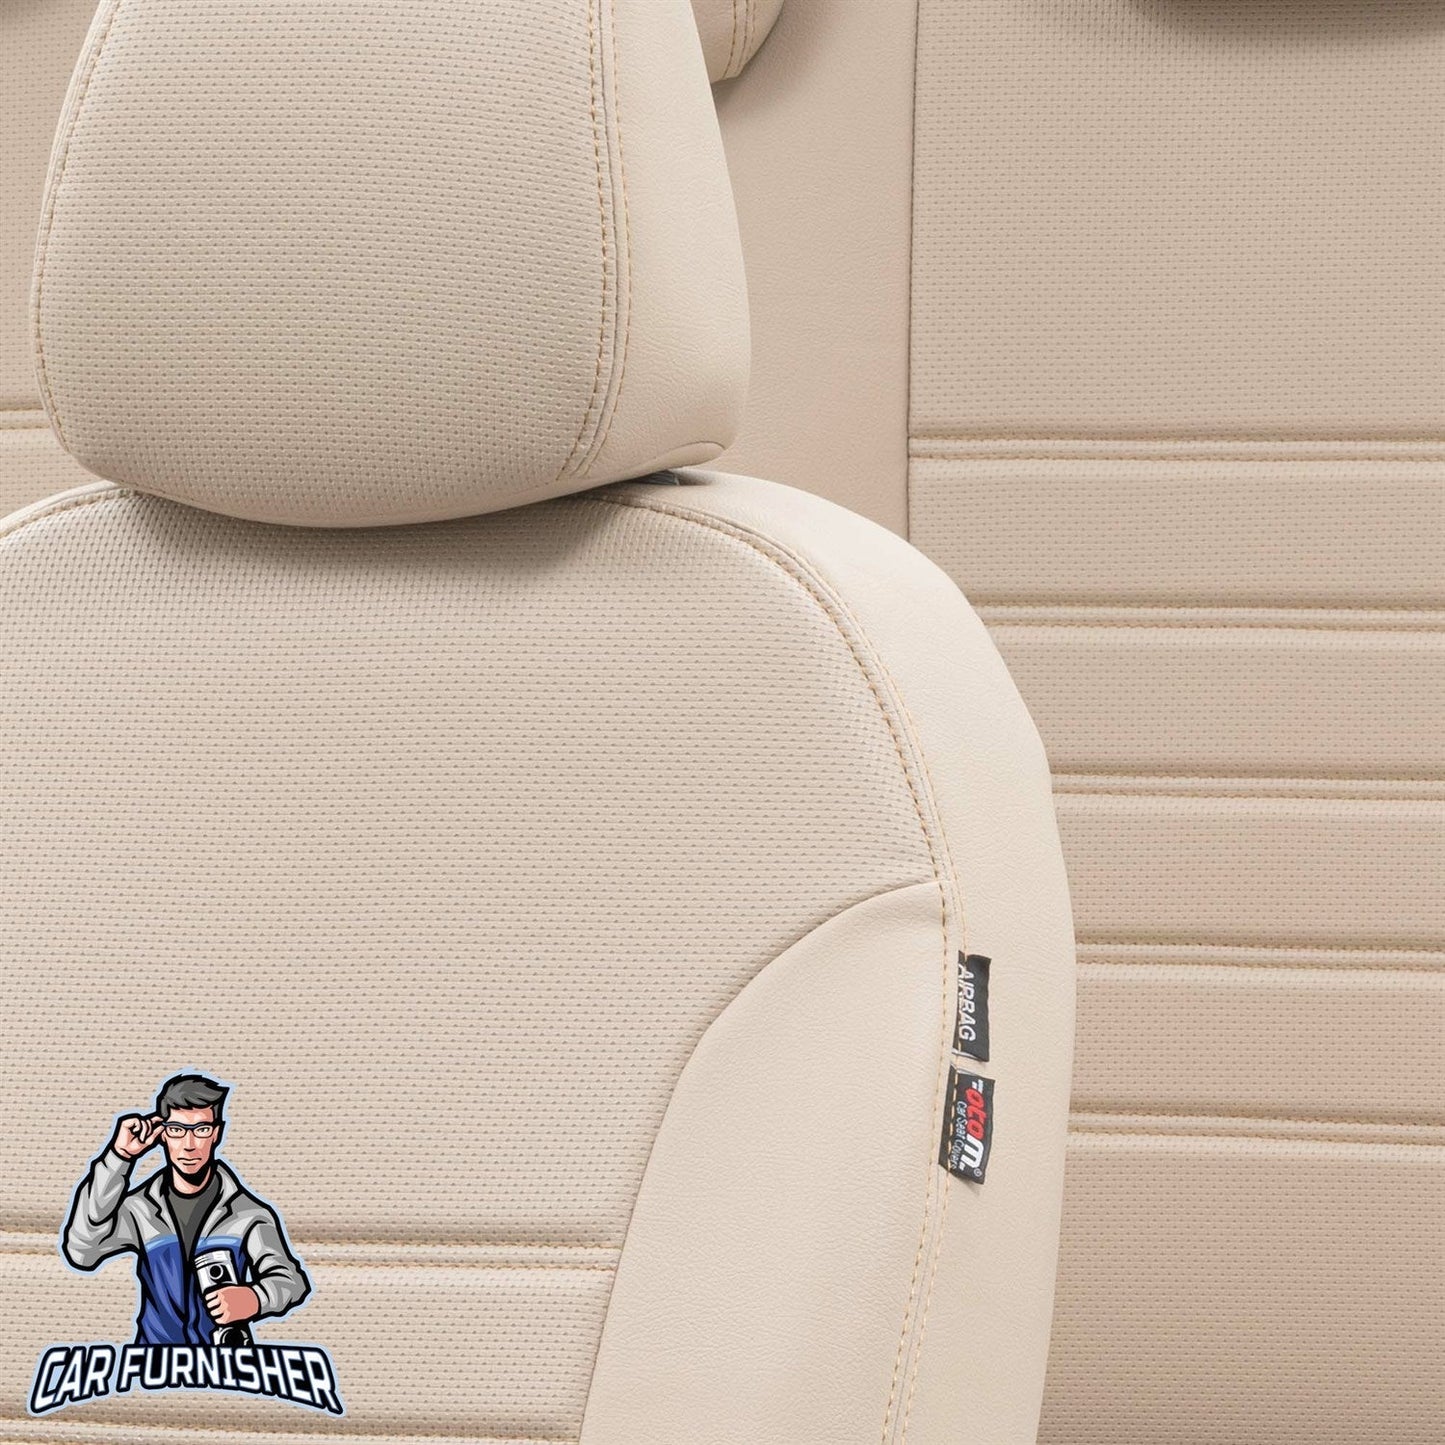 Iveco Eurocargo Seat Cover New York Leather Design Beige Leather